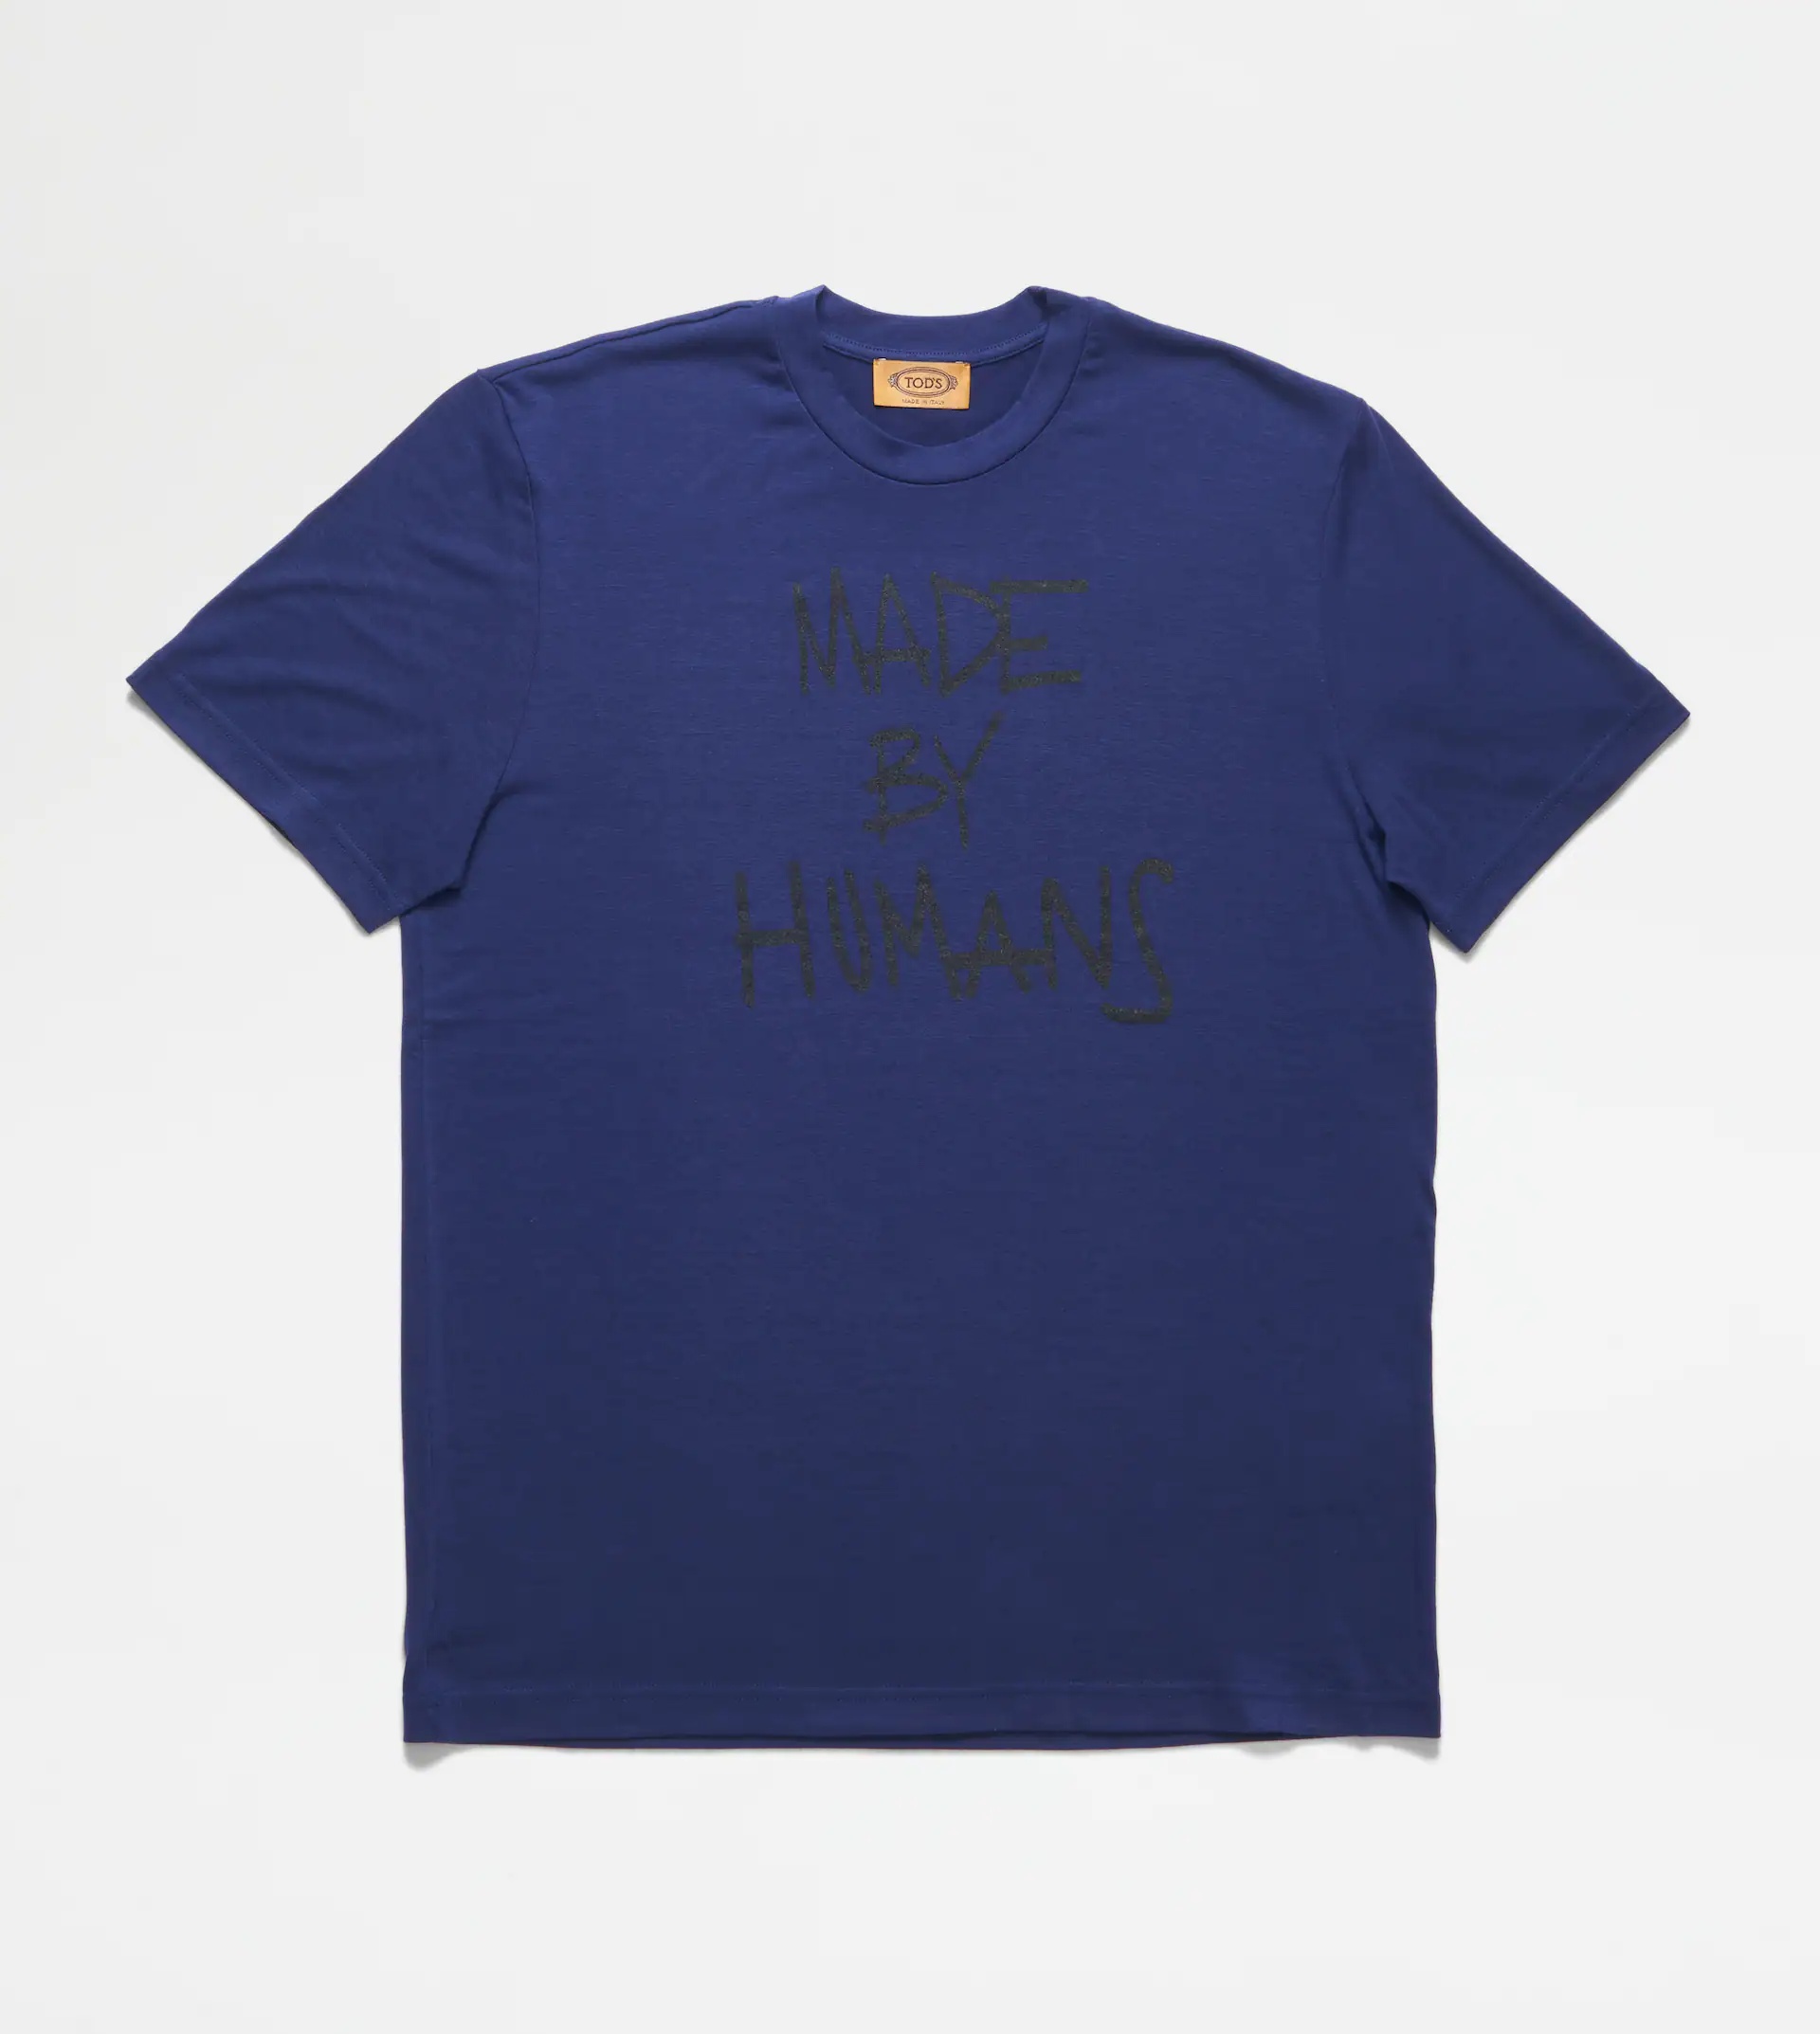 T-SHIRT MADE BY HUMANS - BLUE - 1